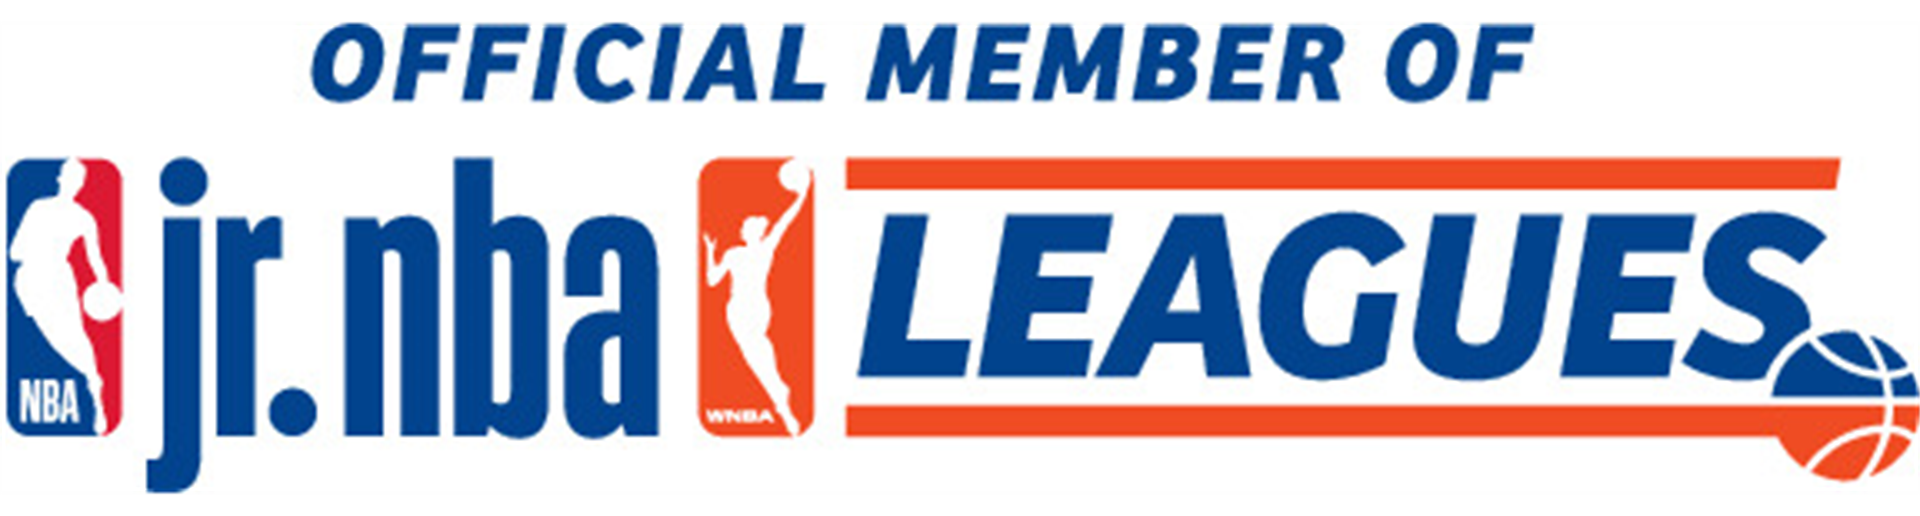 Jr. Panthers Basketball is now an official member of the Jr. NBA Leagues!